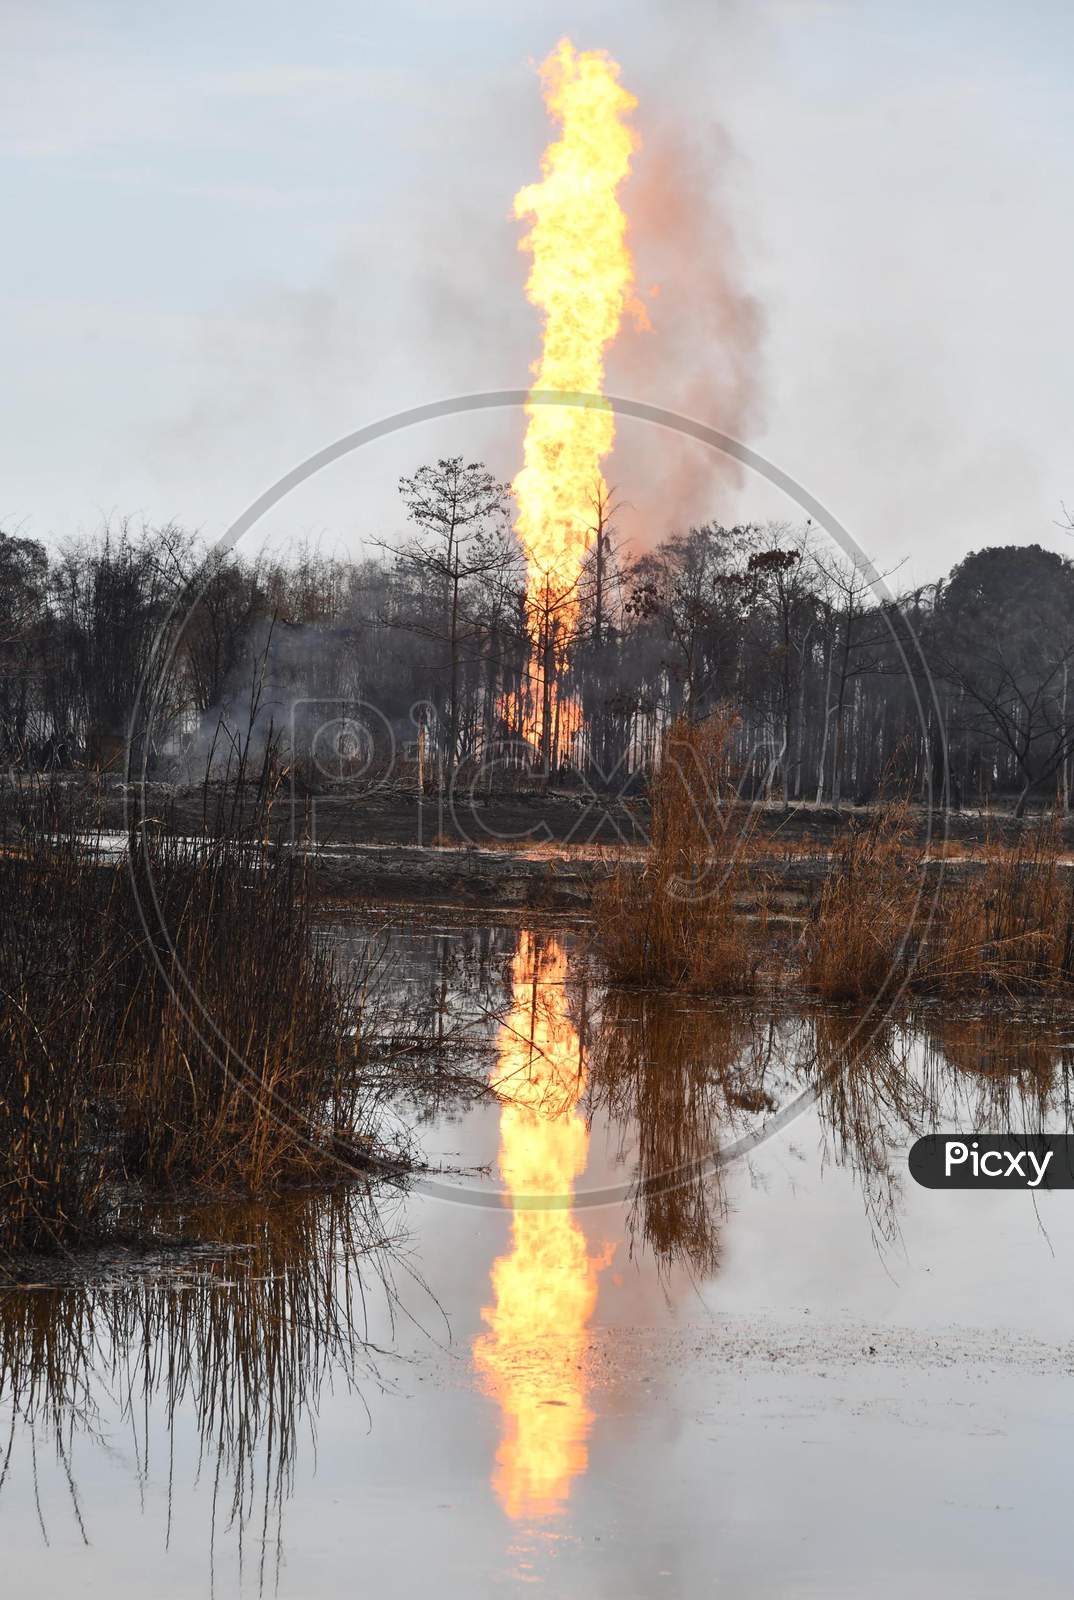 Flames And Smoke Come Out From A Well Run By State-Owned Oil India In Tinsukia District Of Assam On June 10,2020